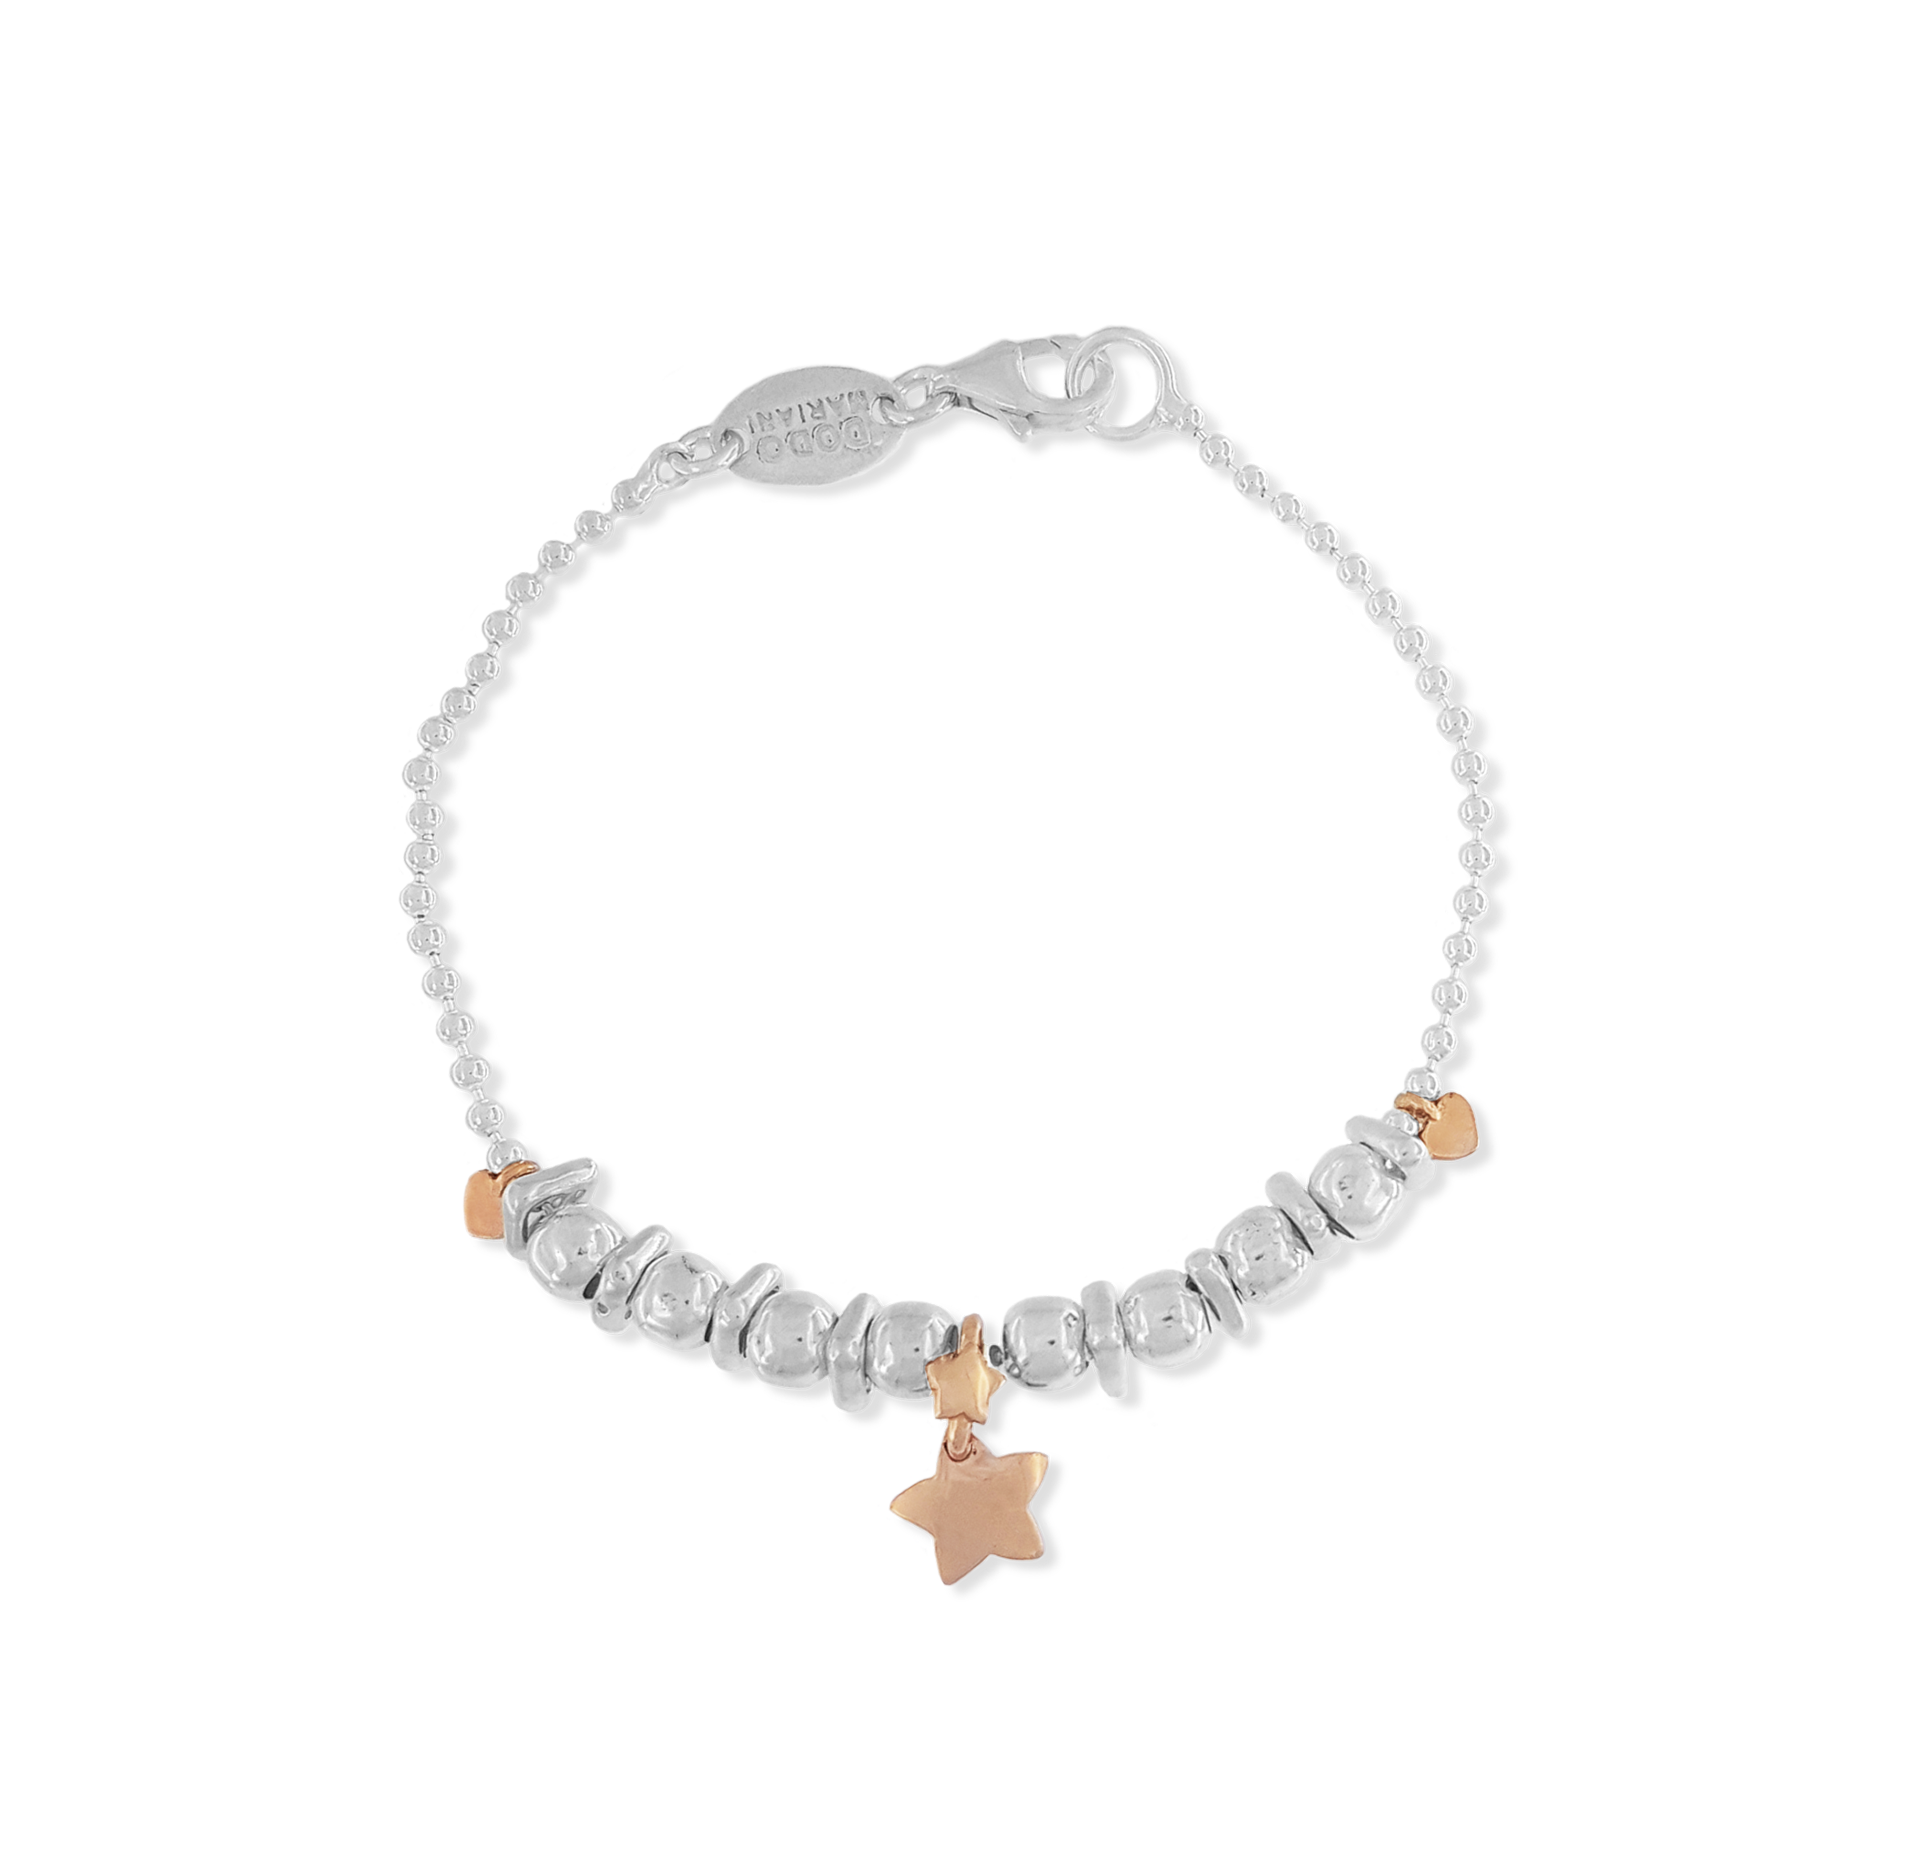 AU 9KT Triangle-Bubble and Stopper Ball Bracelet with Medium Star in AU 9KT BR183